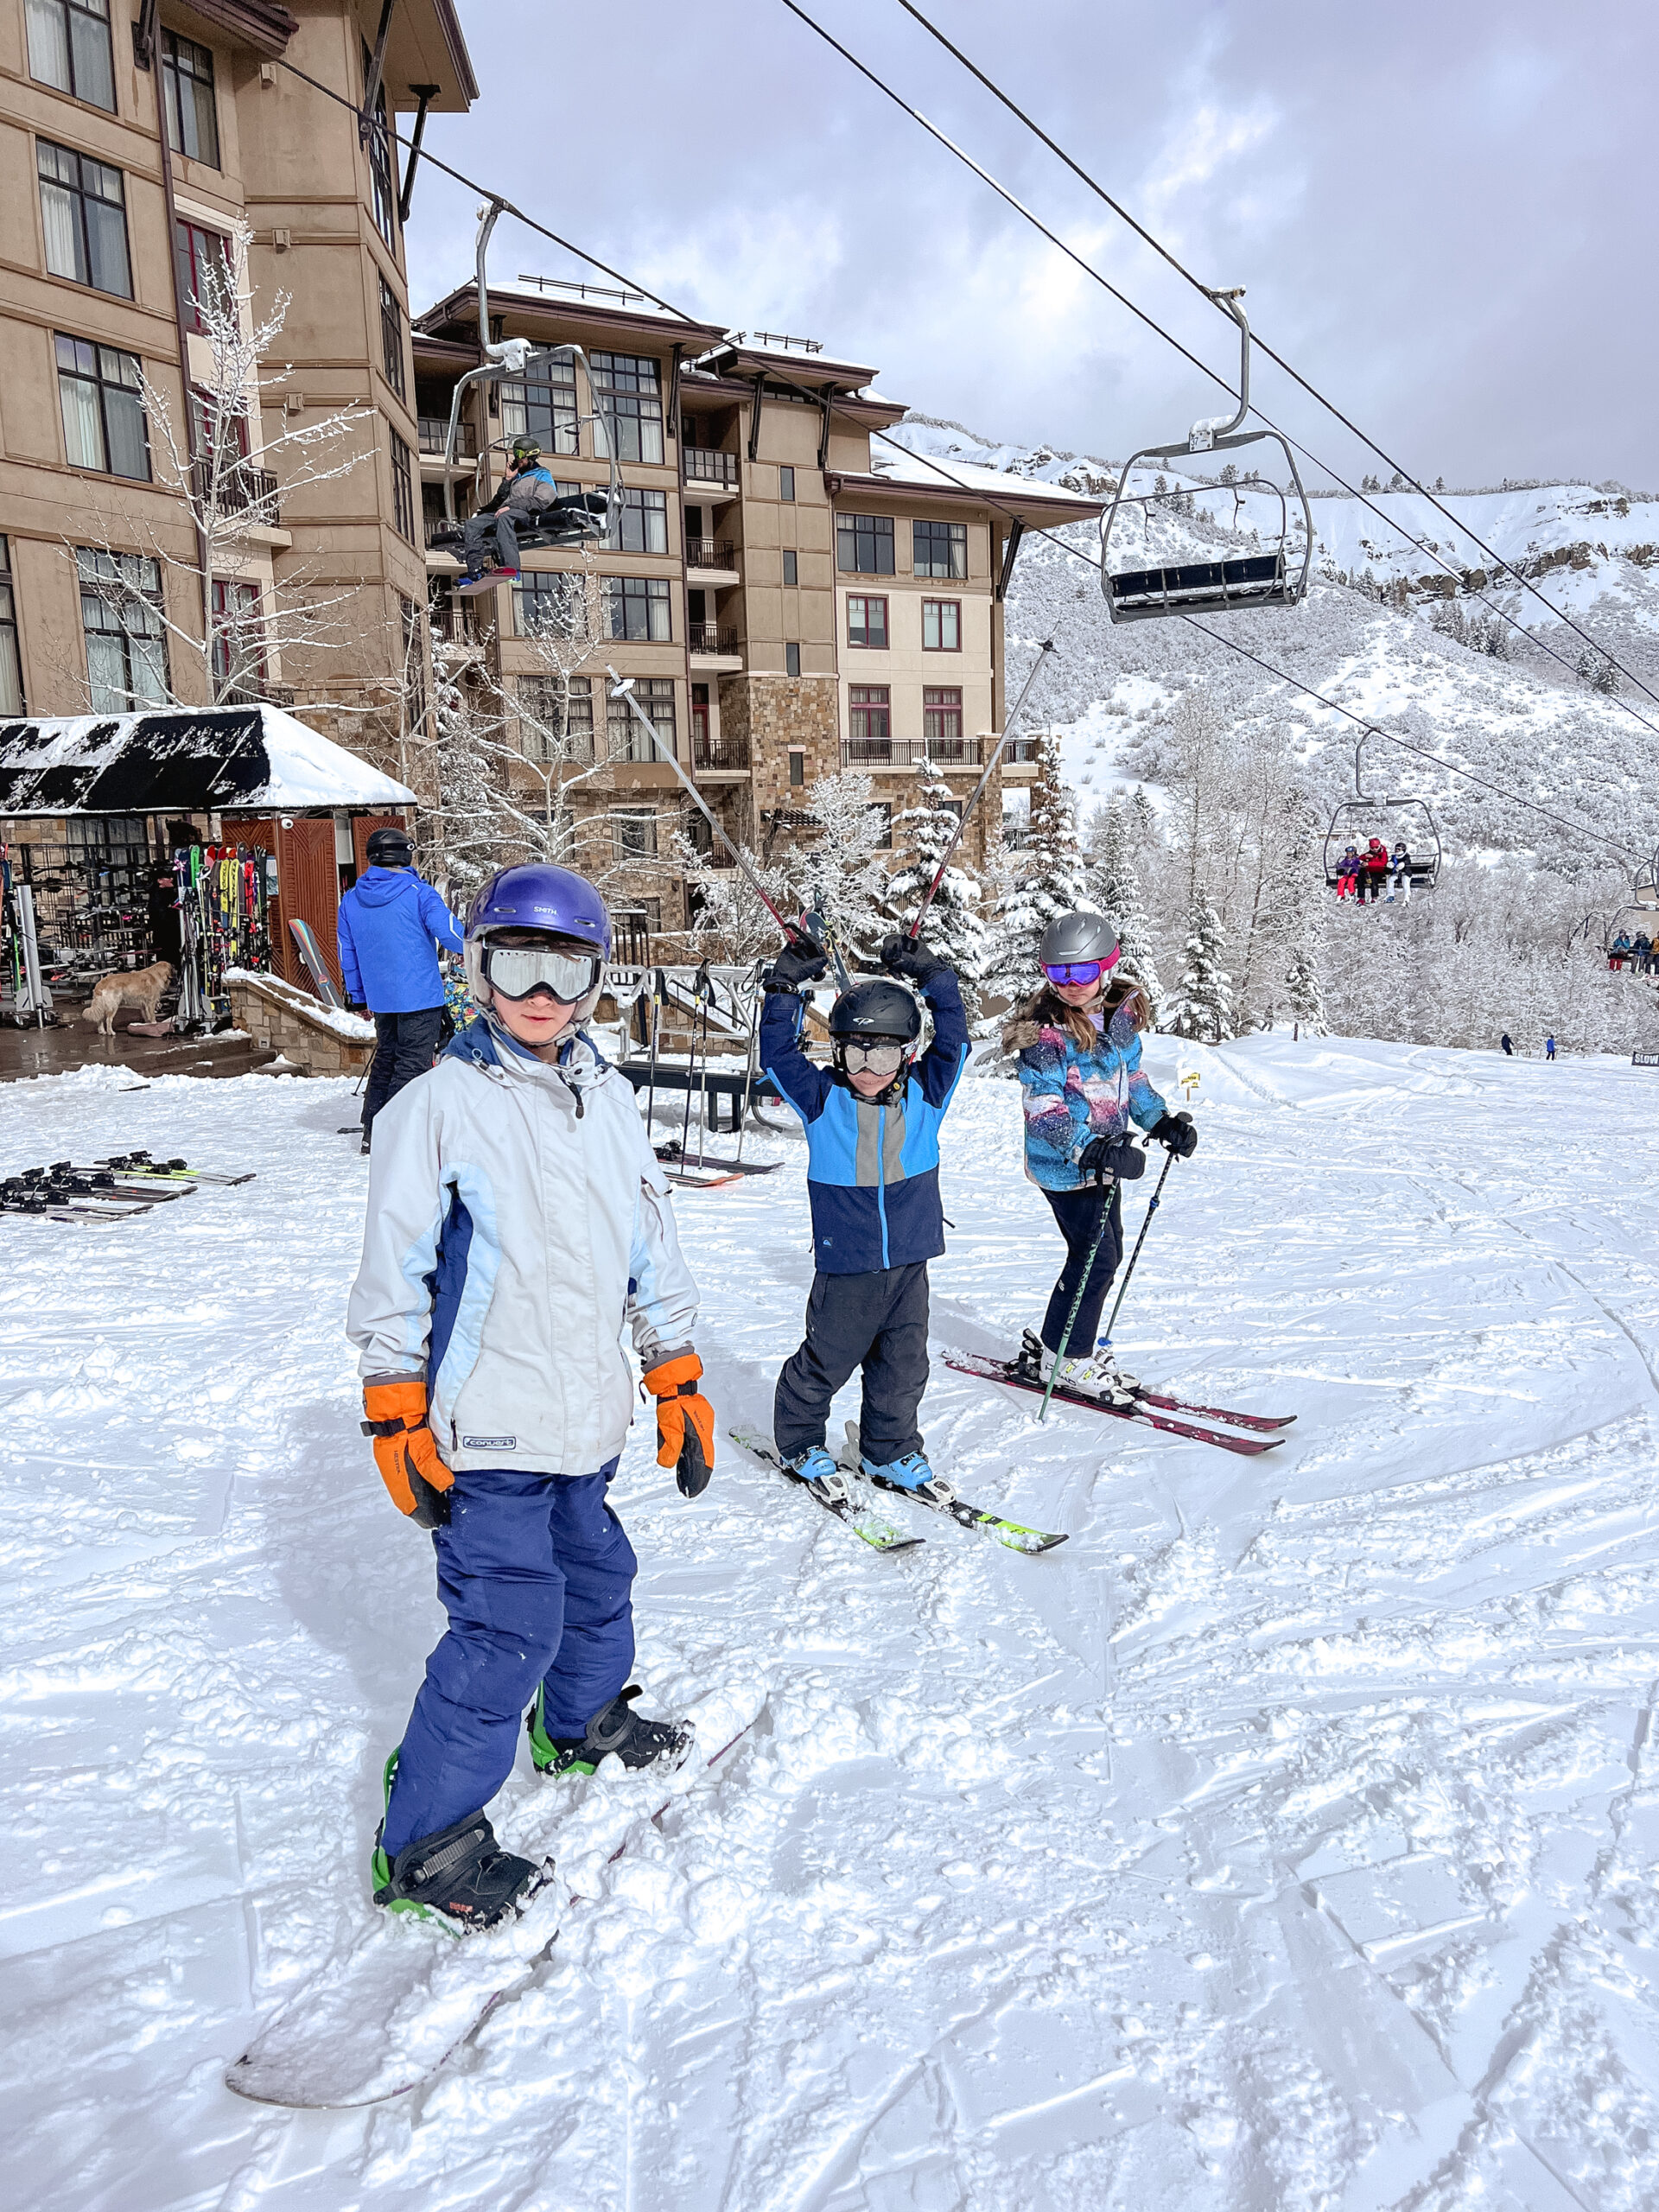 on the snow and ready to roll from the ski in/ ski out entrance at the viceroy snowmass #familyskitrip #skivacation #kidsski travelwithkids